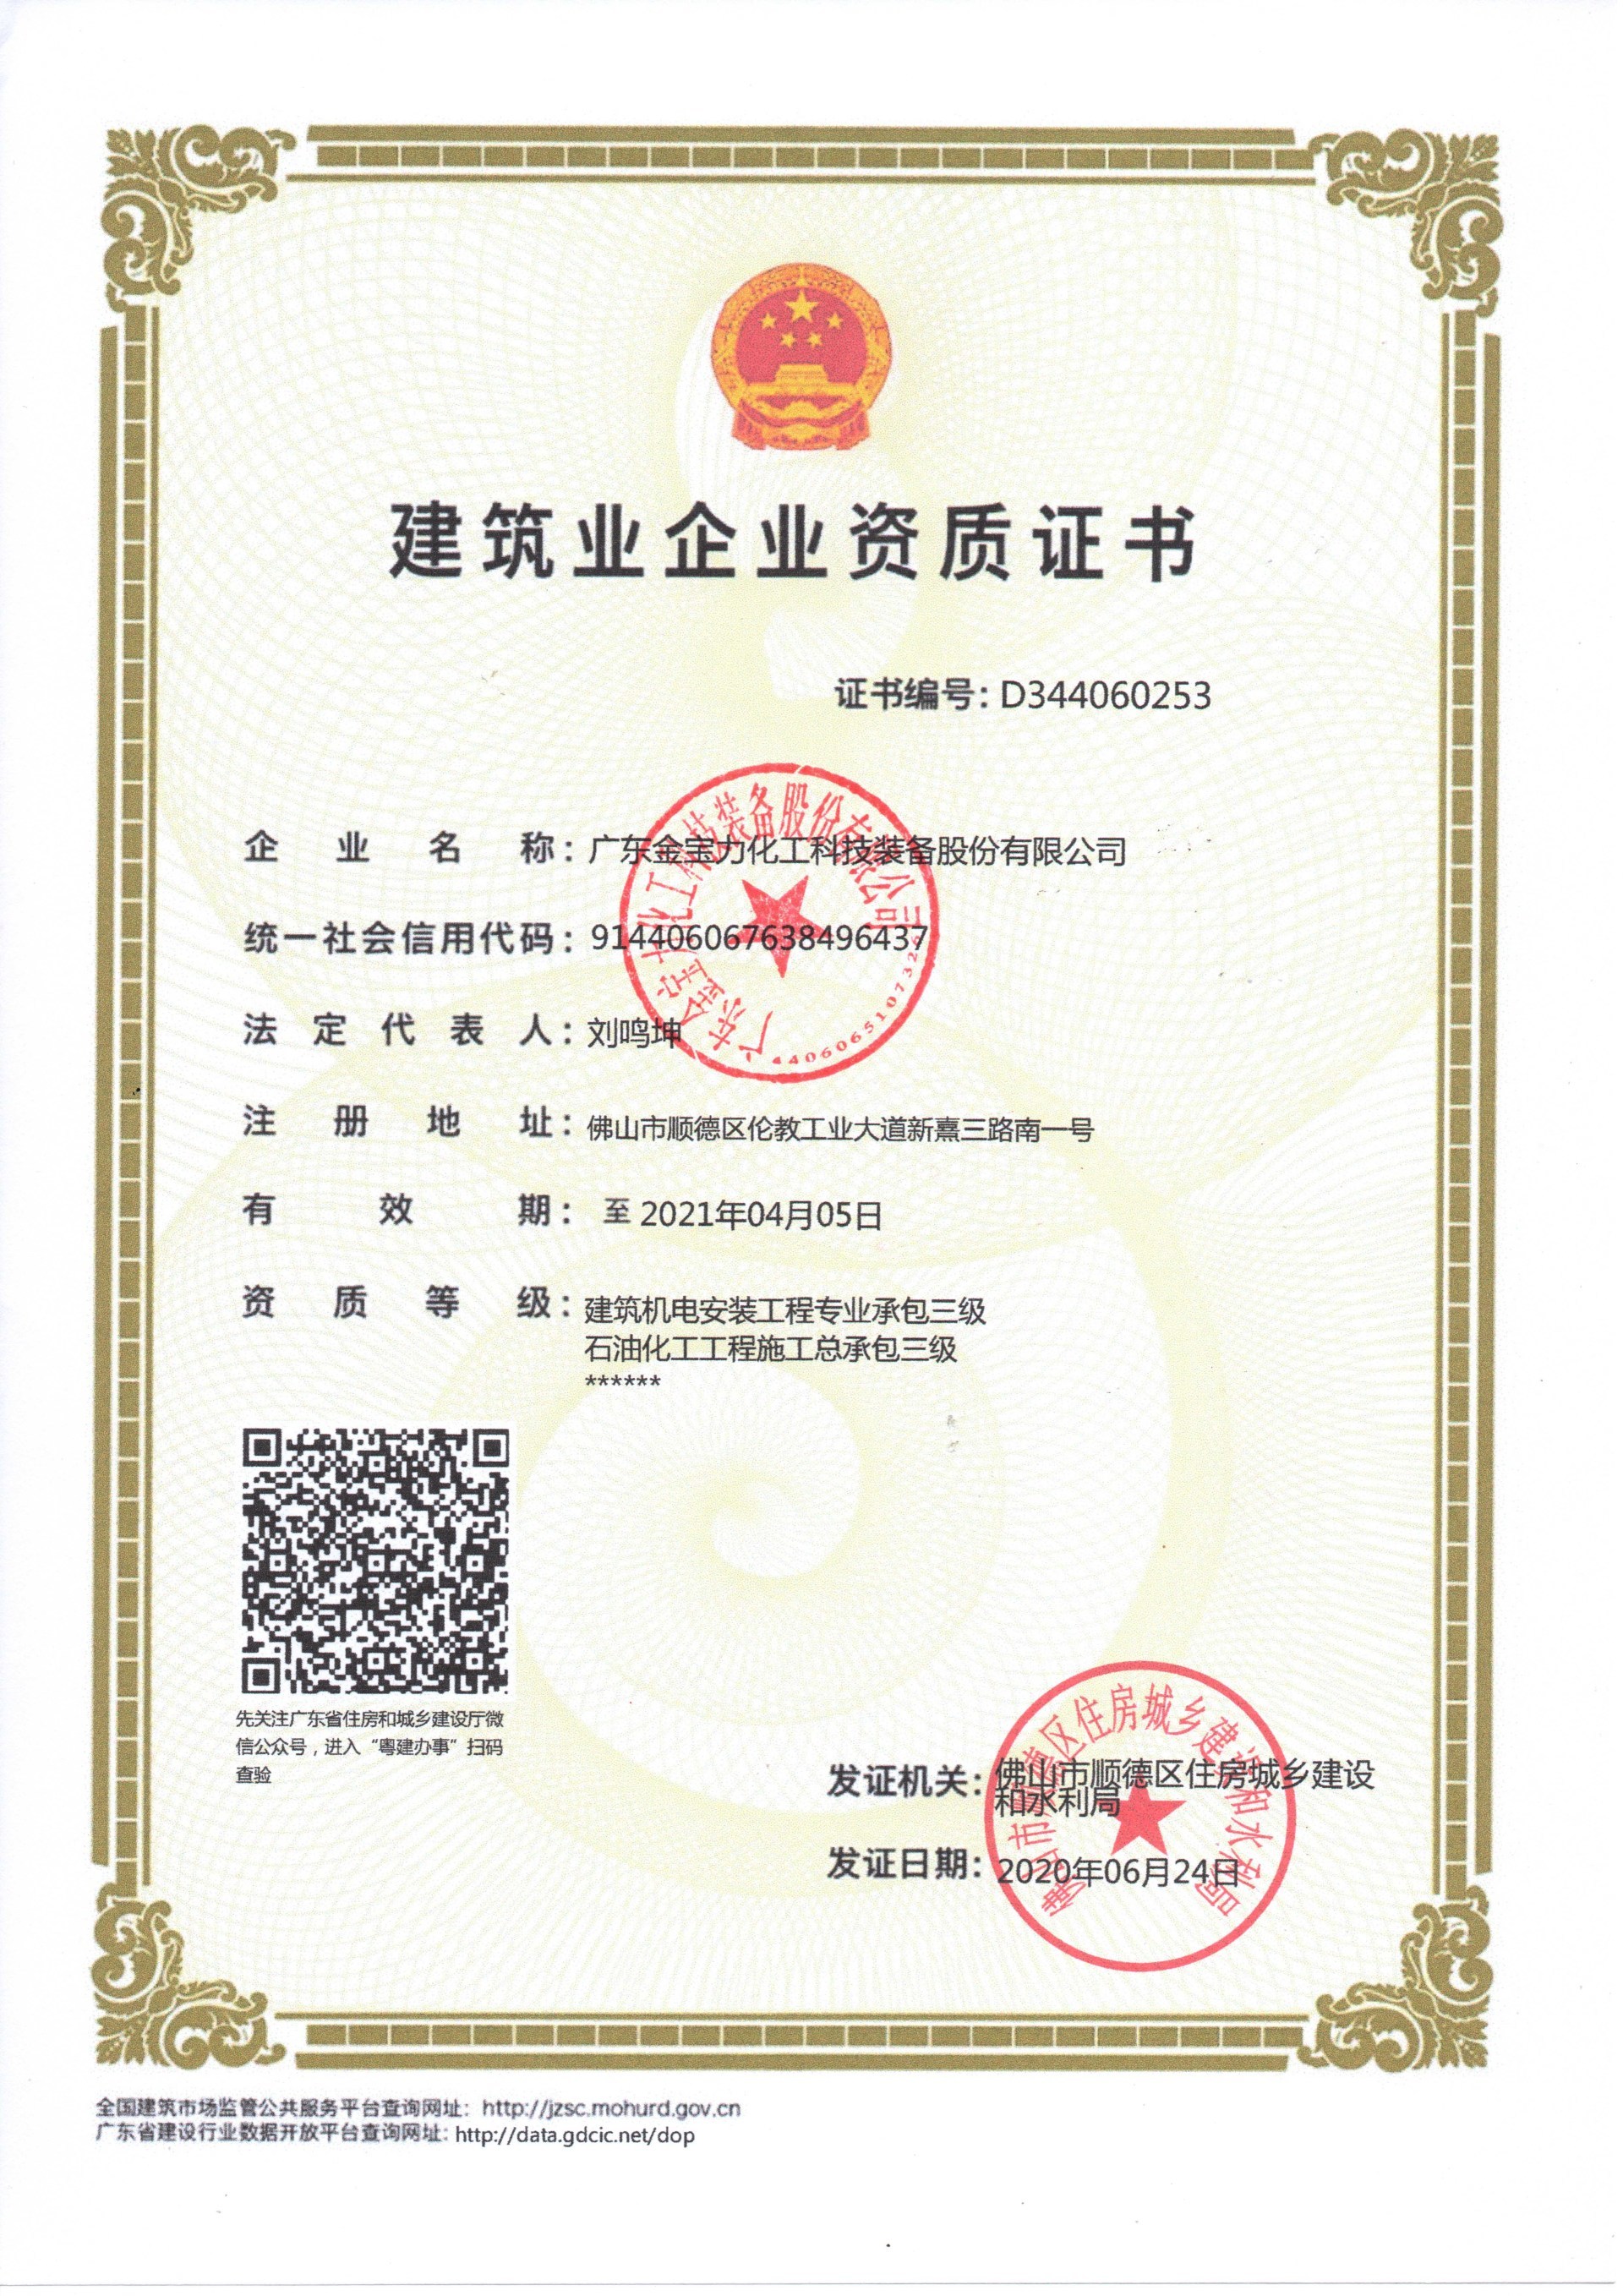 Grade III Qualification Certificate for Construction General Contracting of Petrochemical Engineering